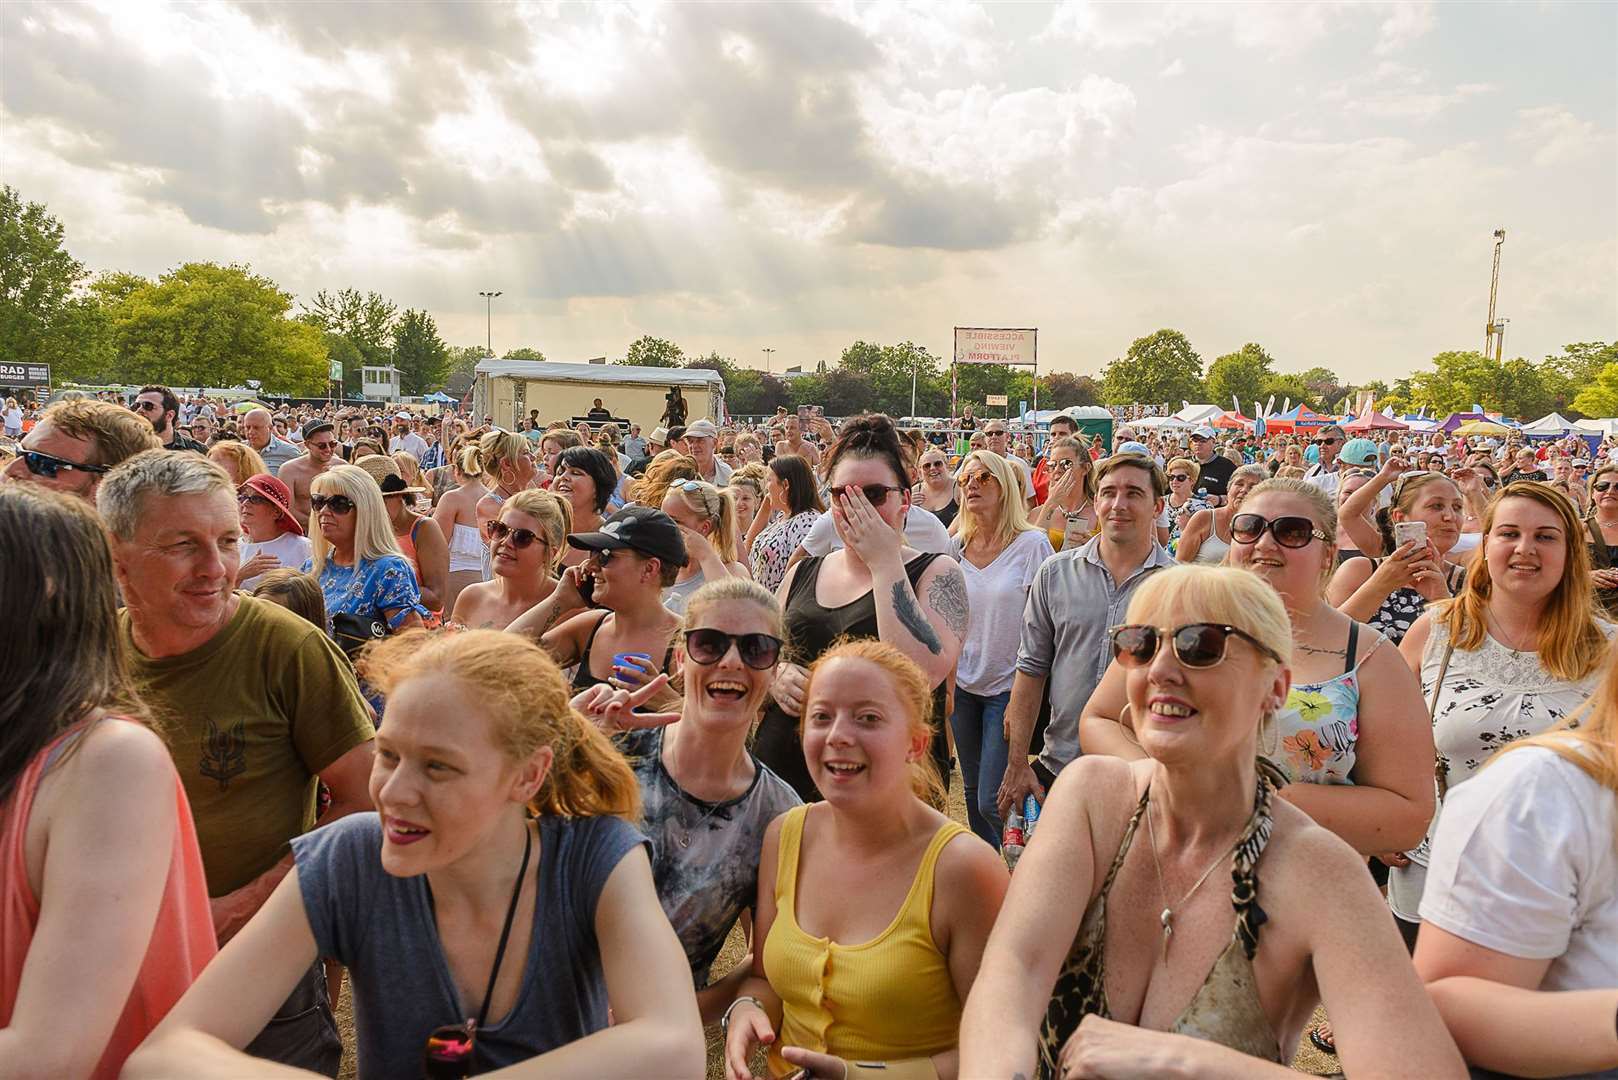 Thousands attended the Dartford Festival last year